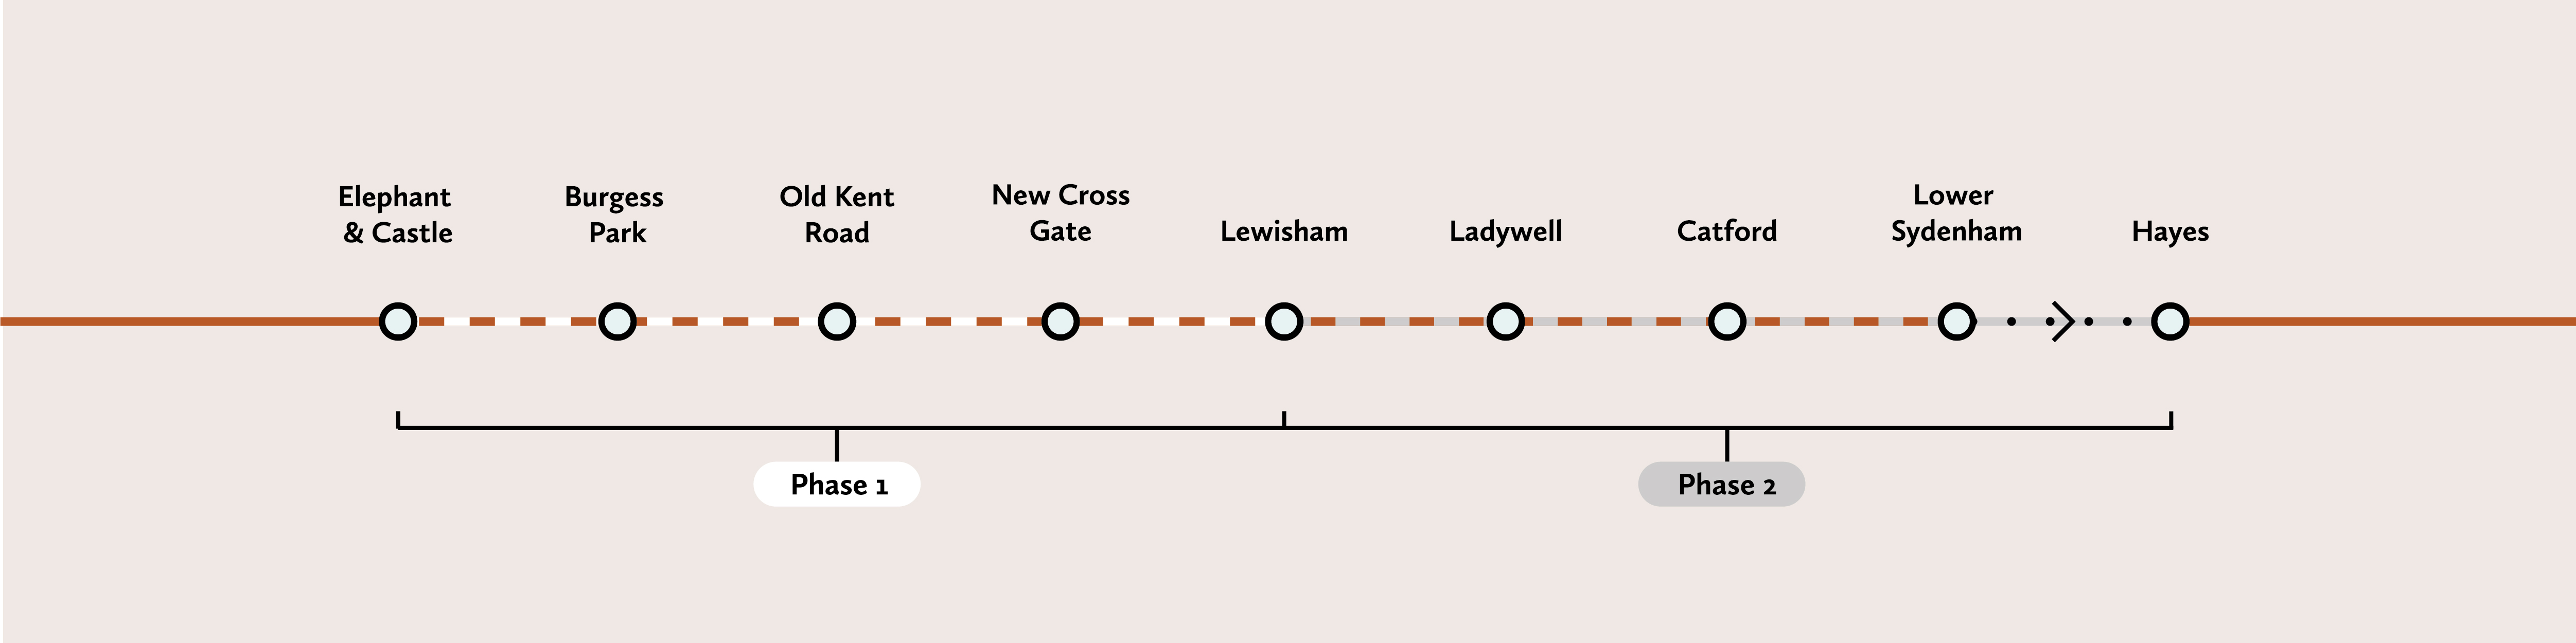 Map of the proposed extension of the Bakerloo Line